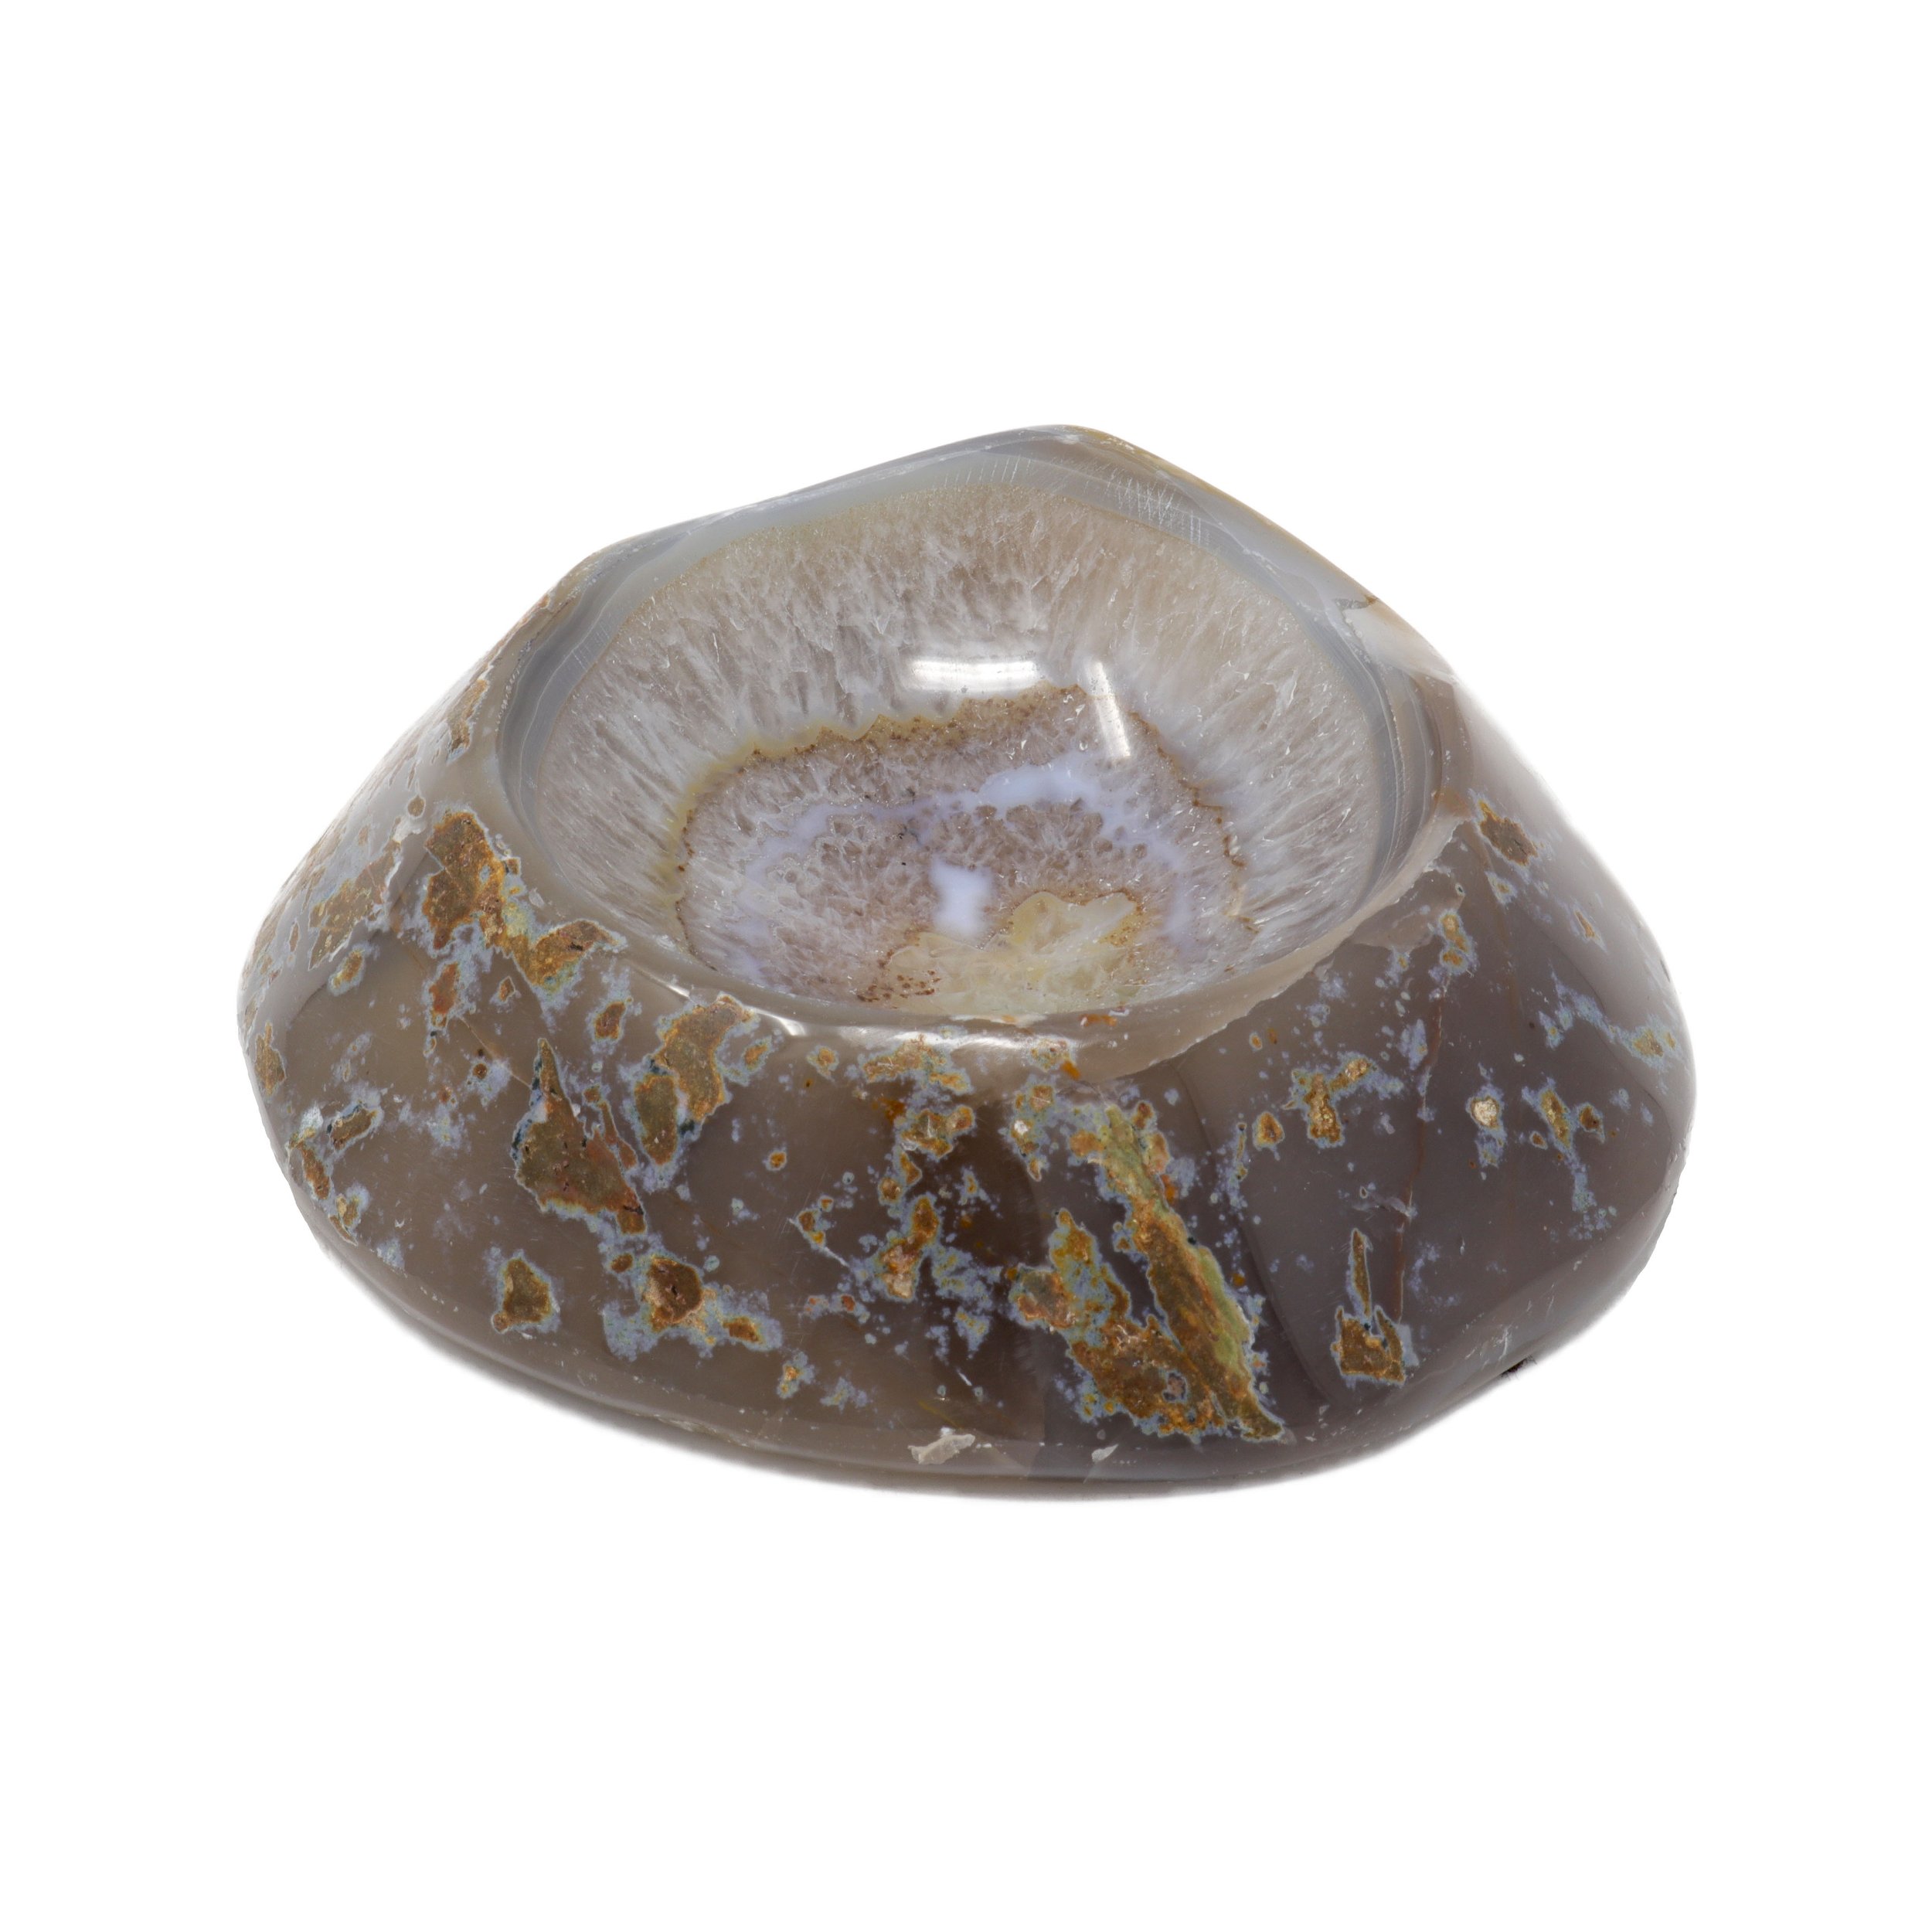 Polished Agate Small Bowl with Gray Exterior